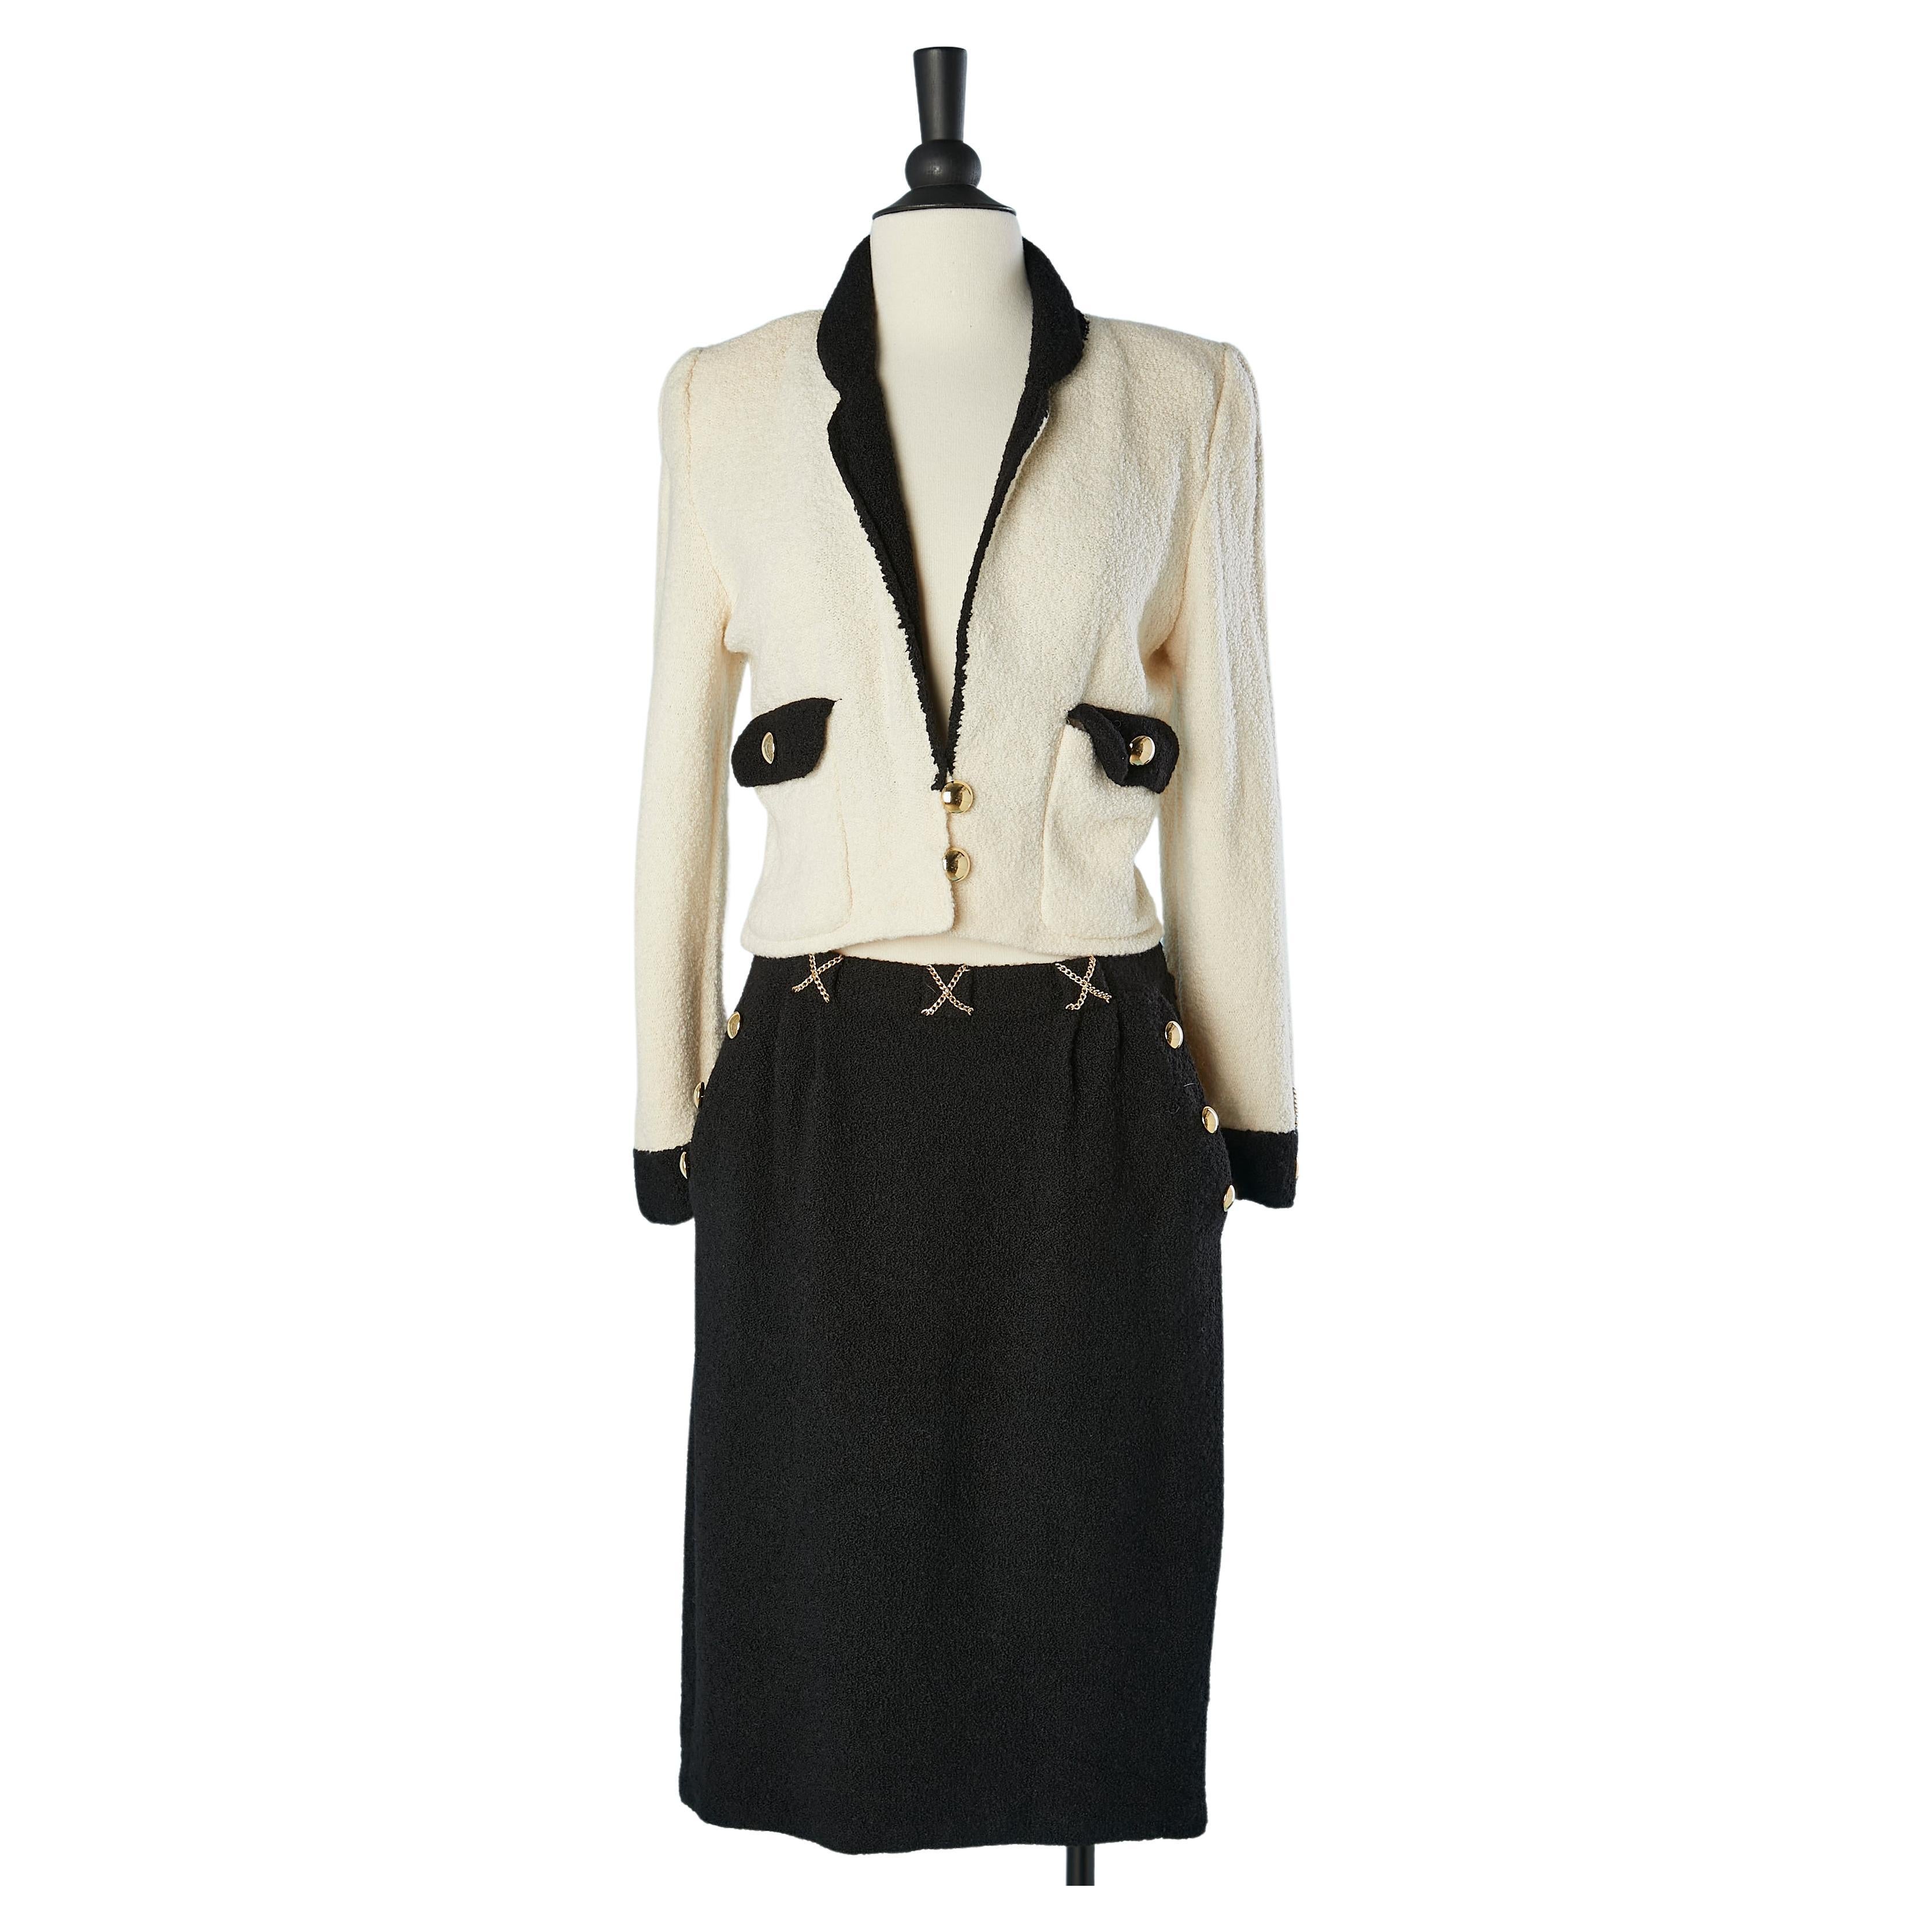 Black&white wool knit skirt-suit with gold metal button Adolfo at Saks Fifth Av For Sale